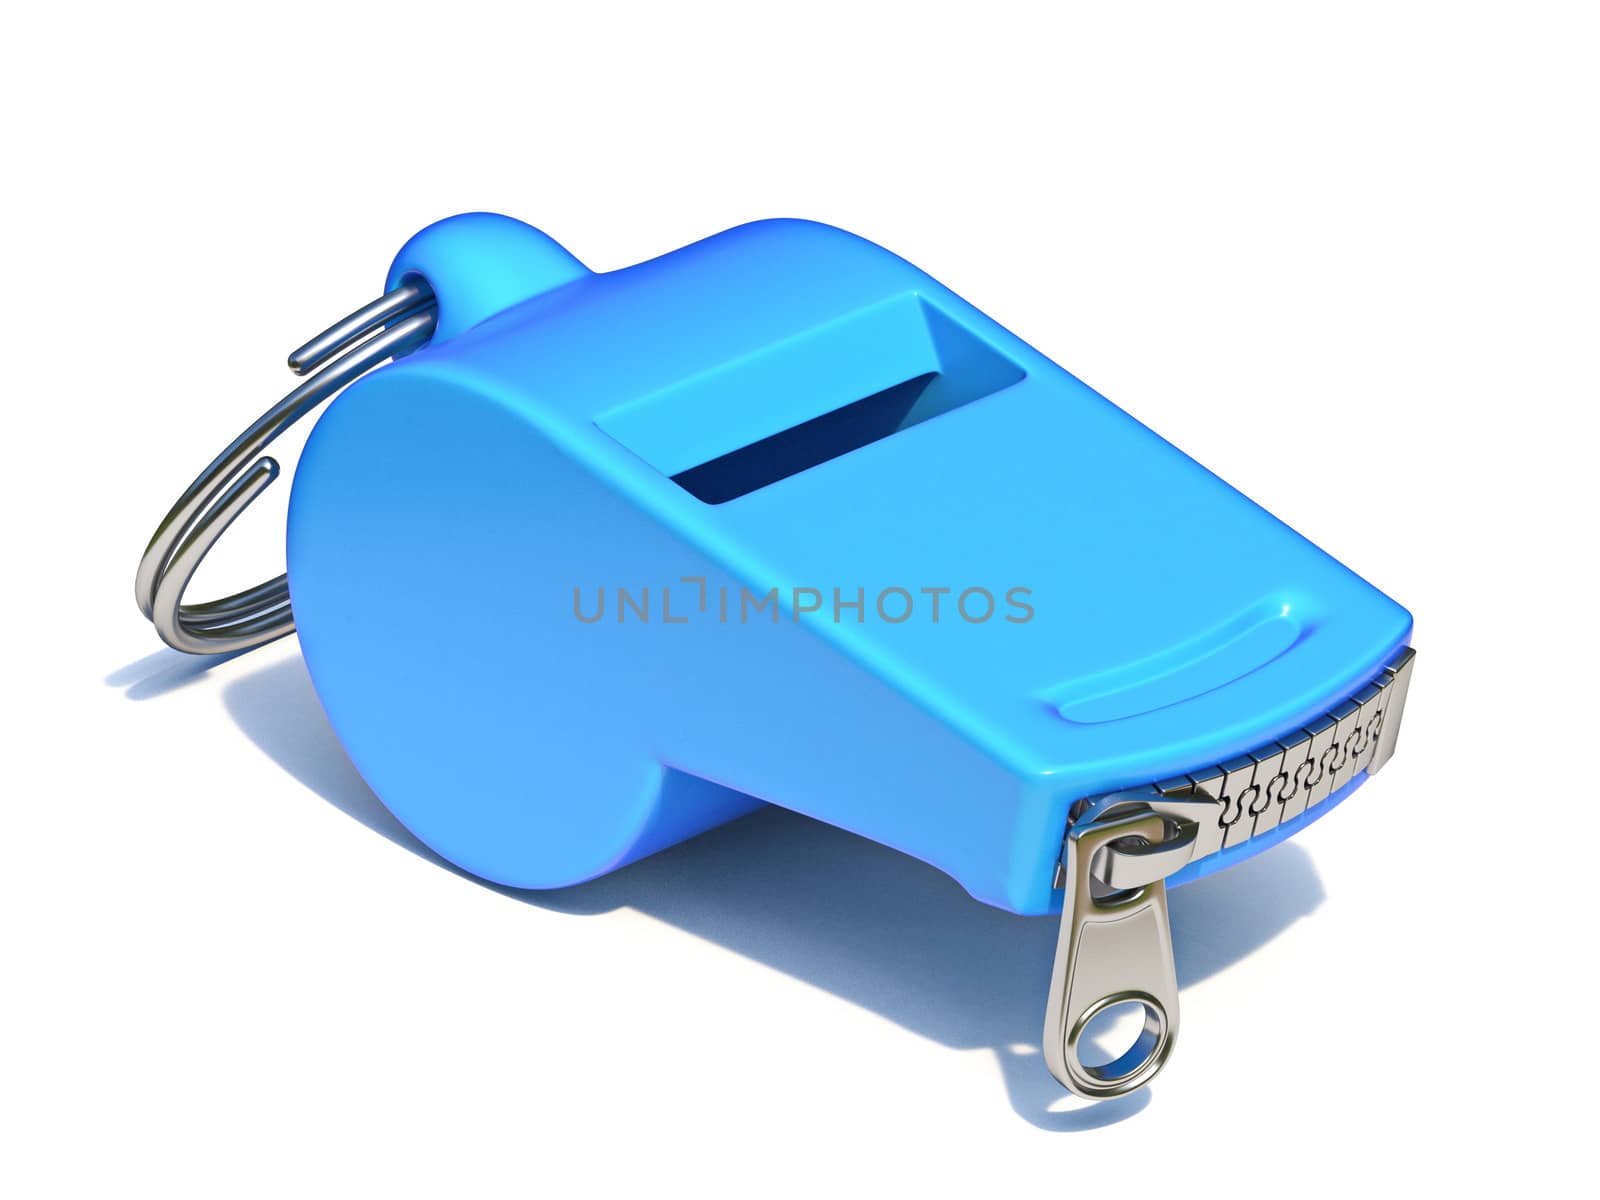 Blue whistle with a closed zipper 3D render illustration isolated on white background